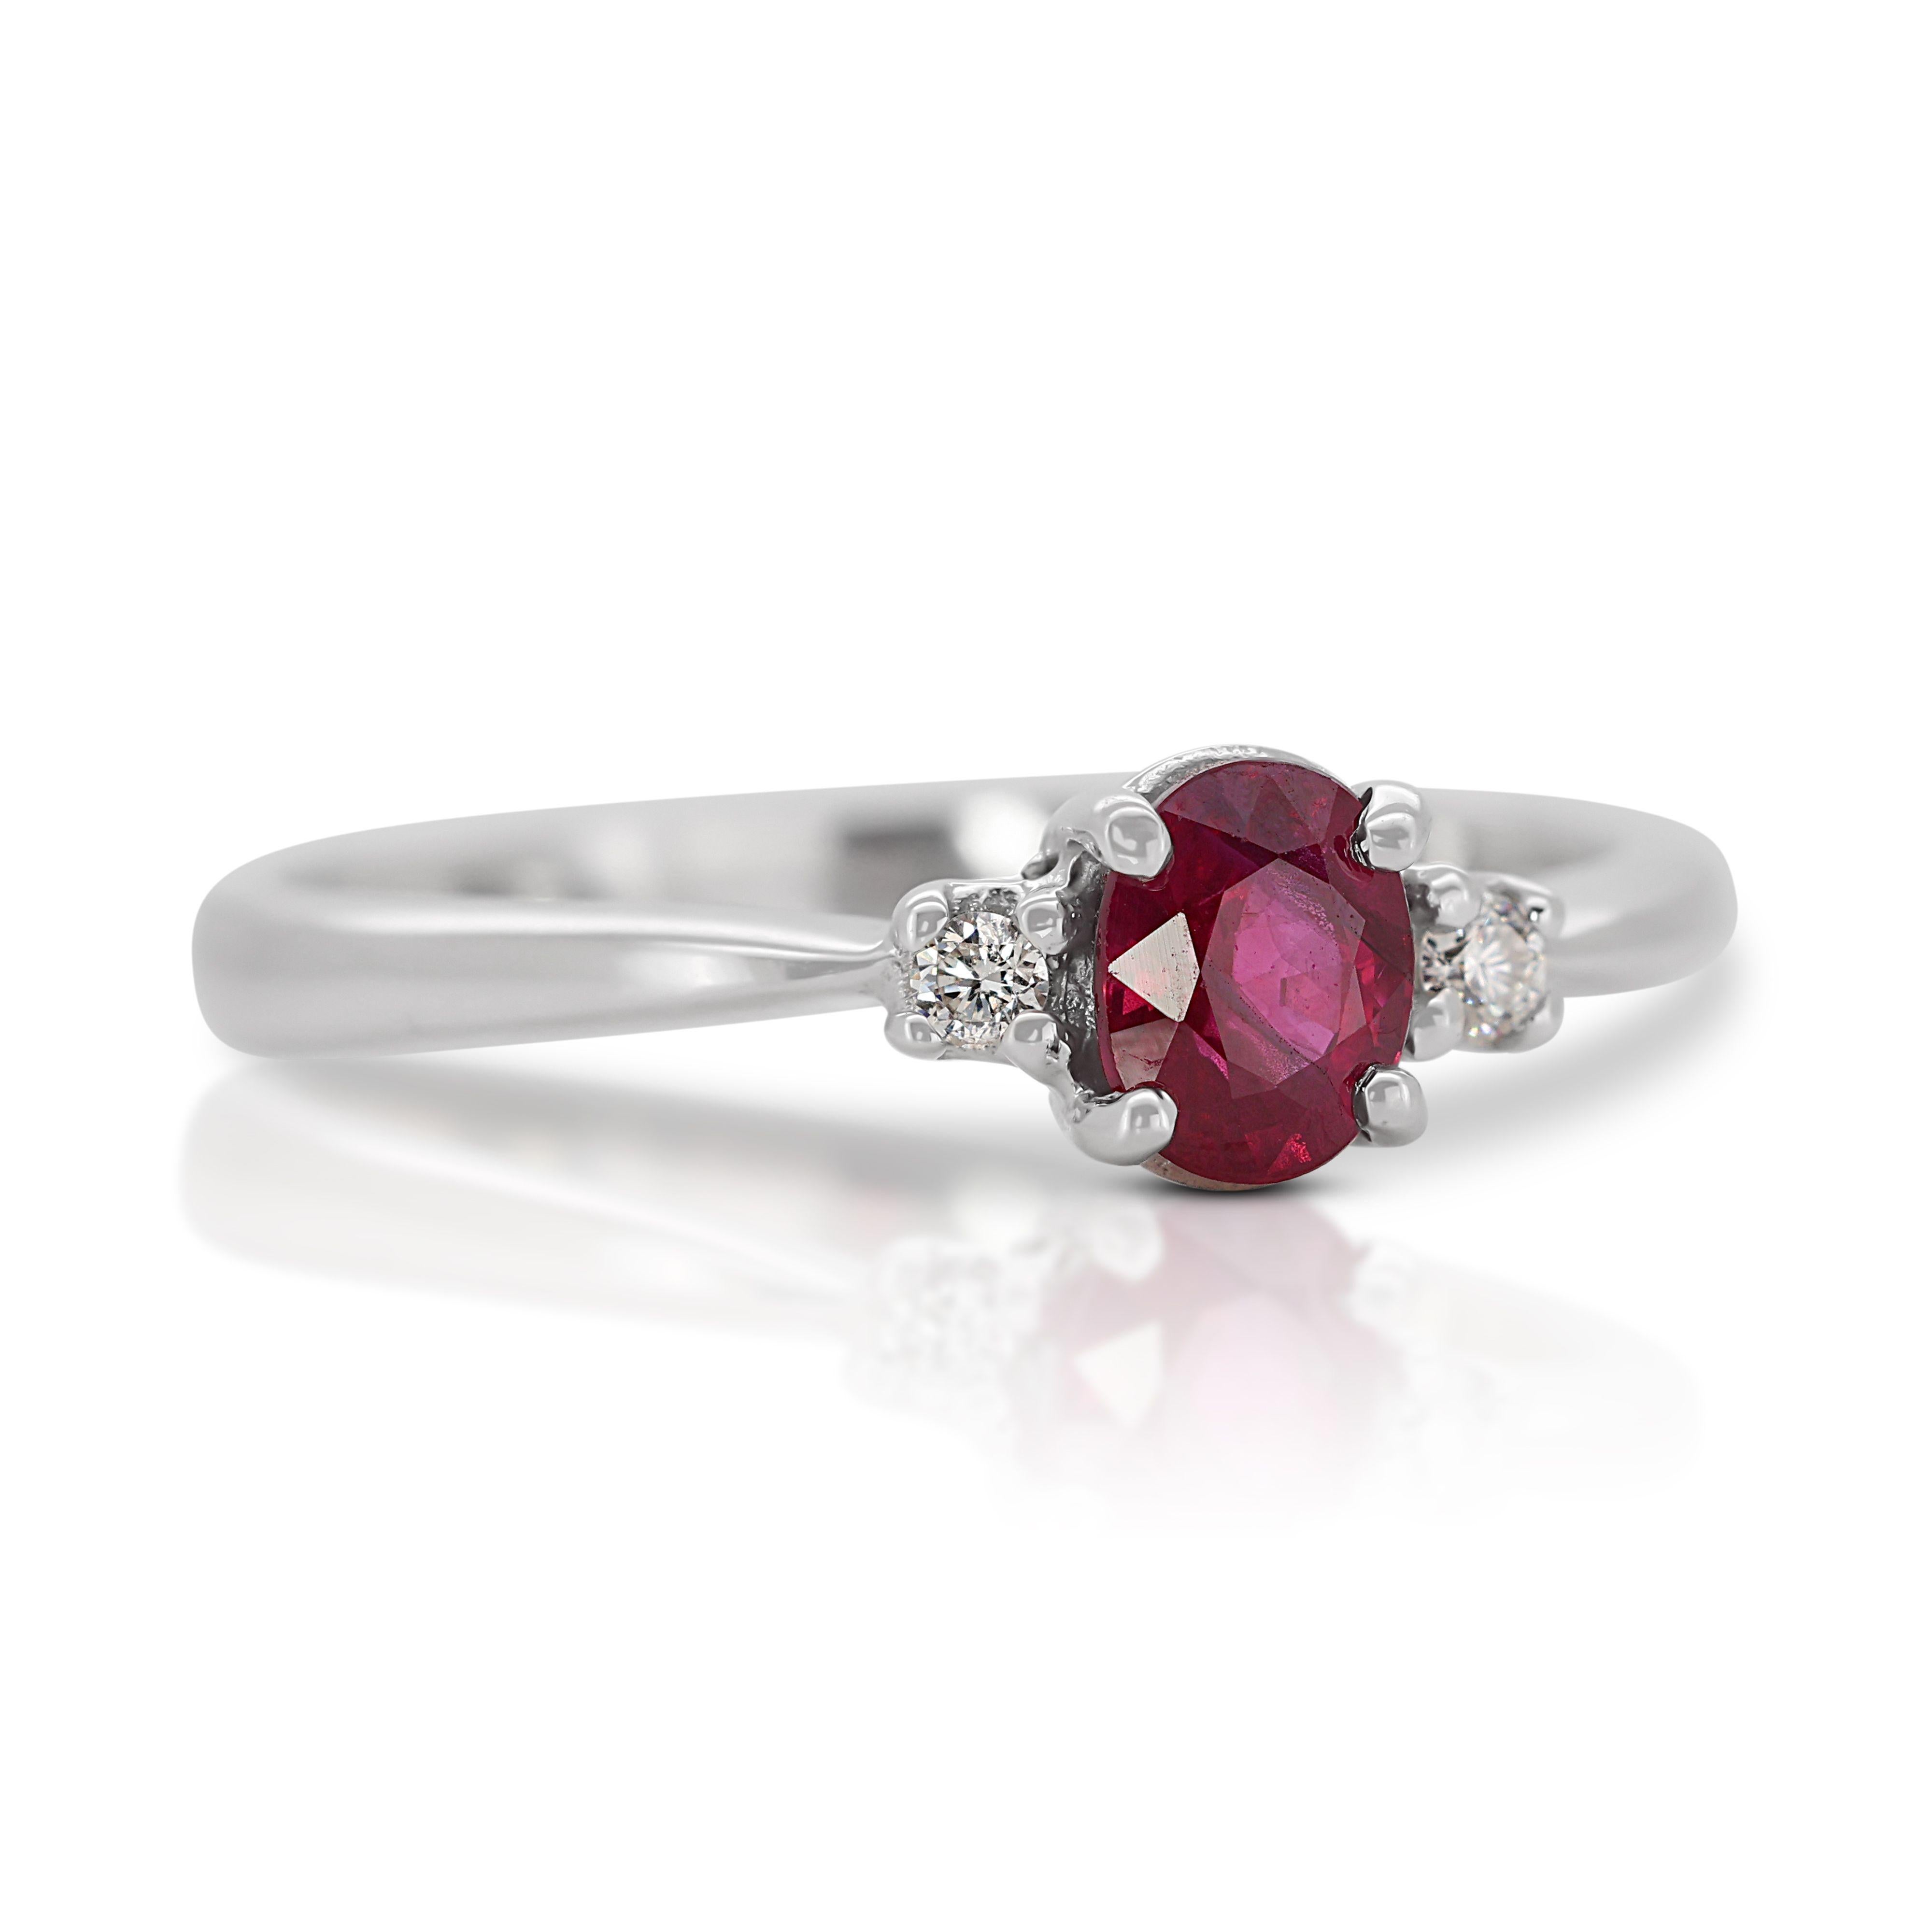 Dazzling 18k White Gold 3 Stone Ring 0.34ct Natural Ruby and Diamonds NGI Cert In Excellent Condition For Sale In רמת גן, IL